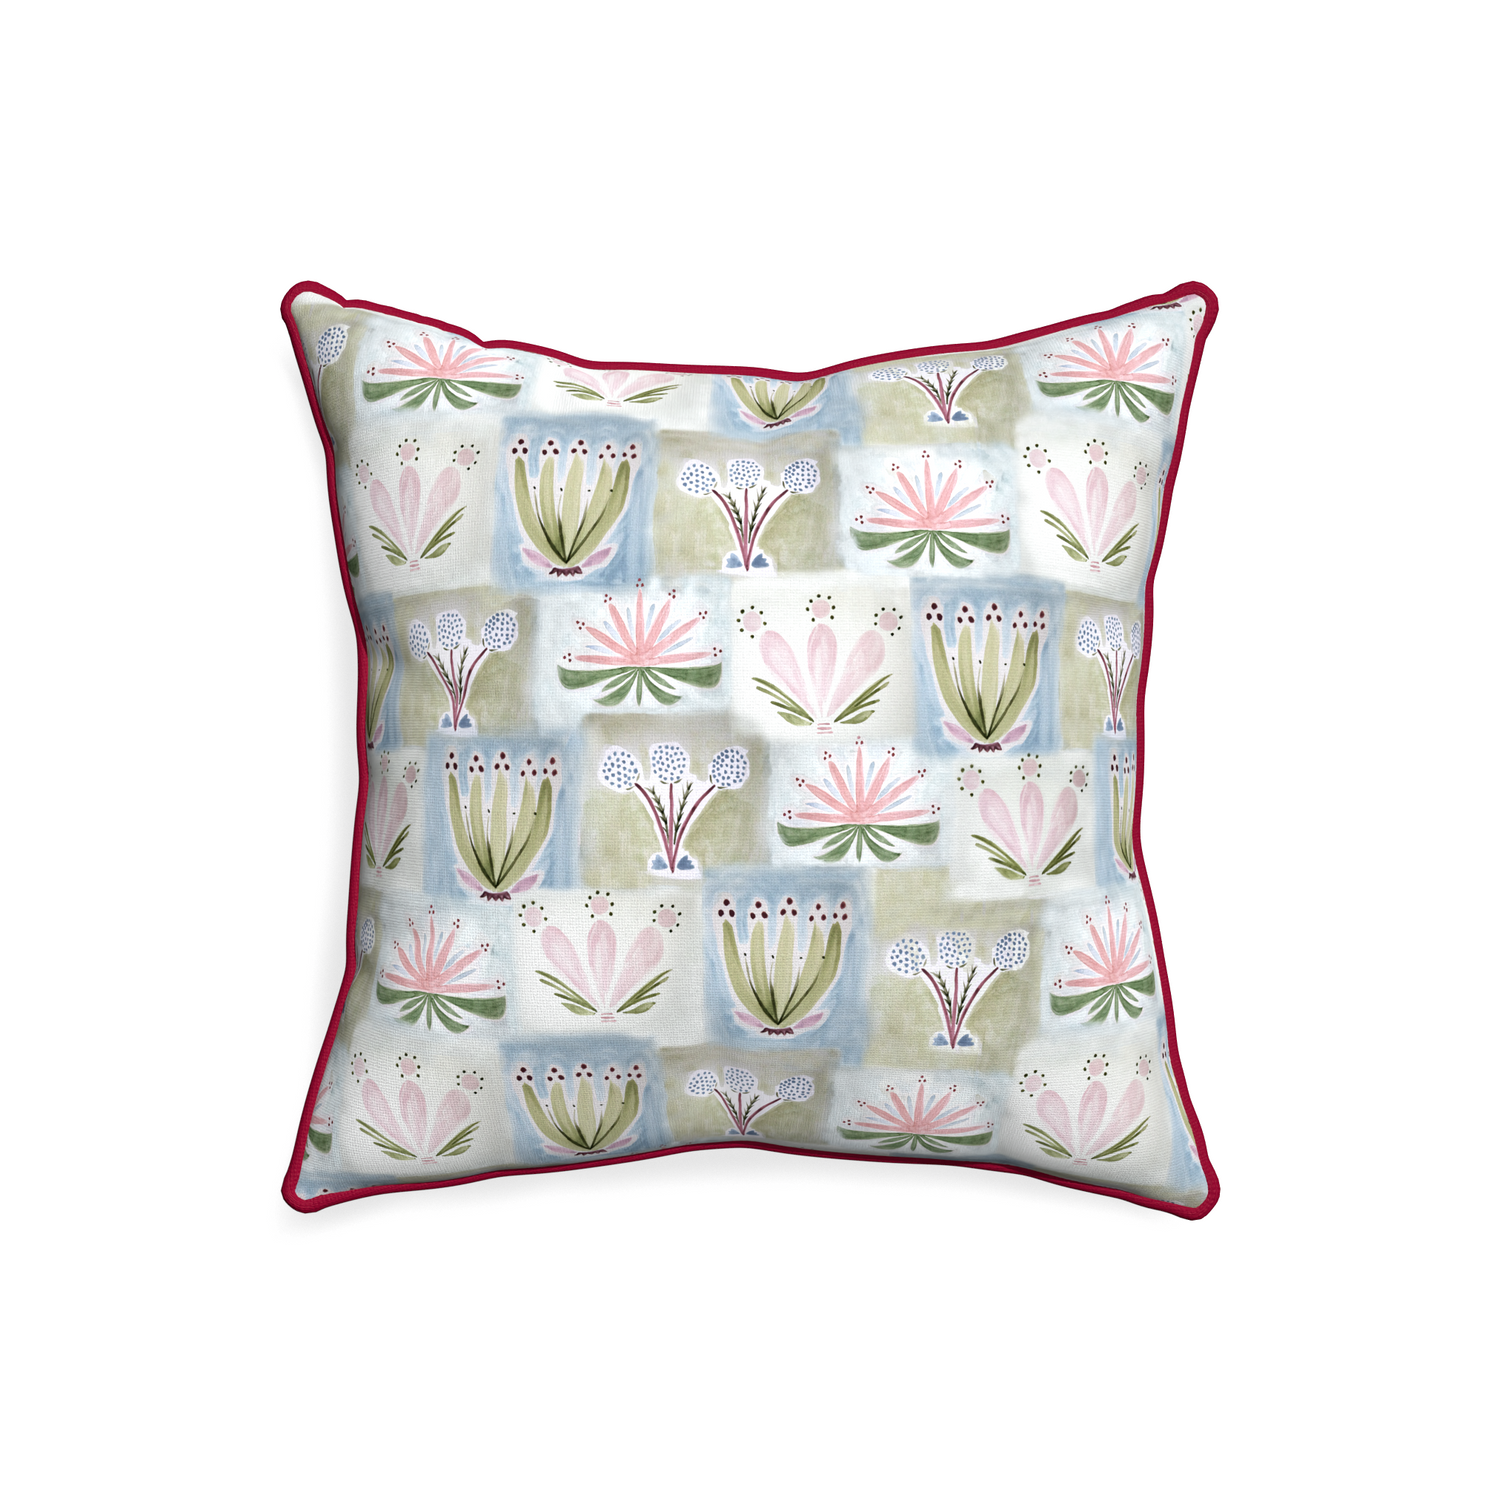 20-square harper custom hand-painted floralpillow with raspberry piping on white background